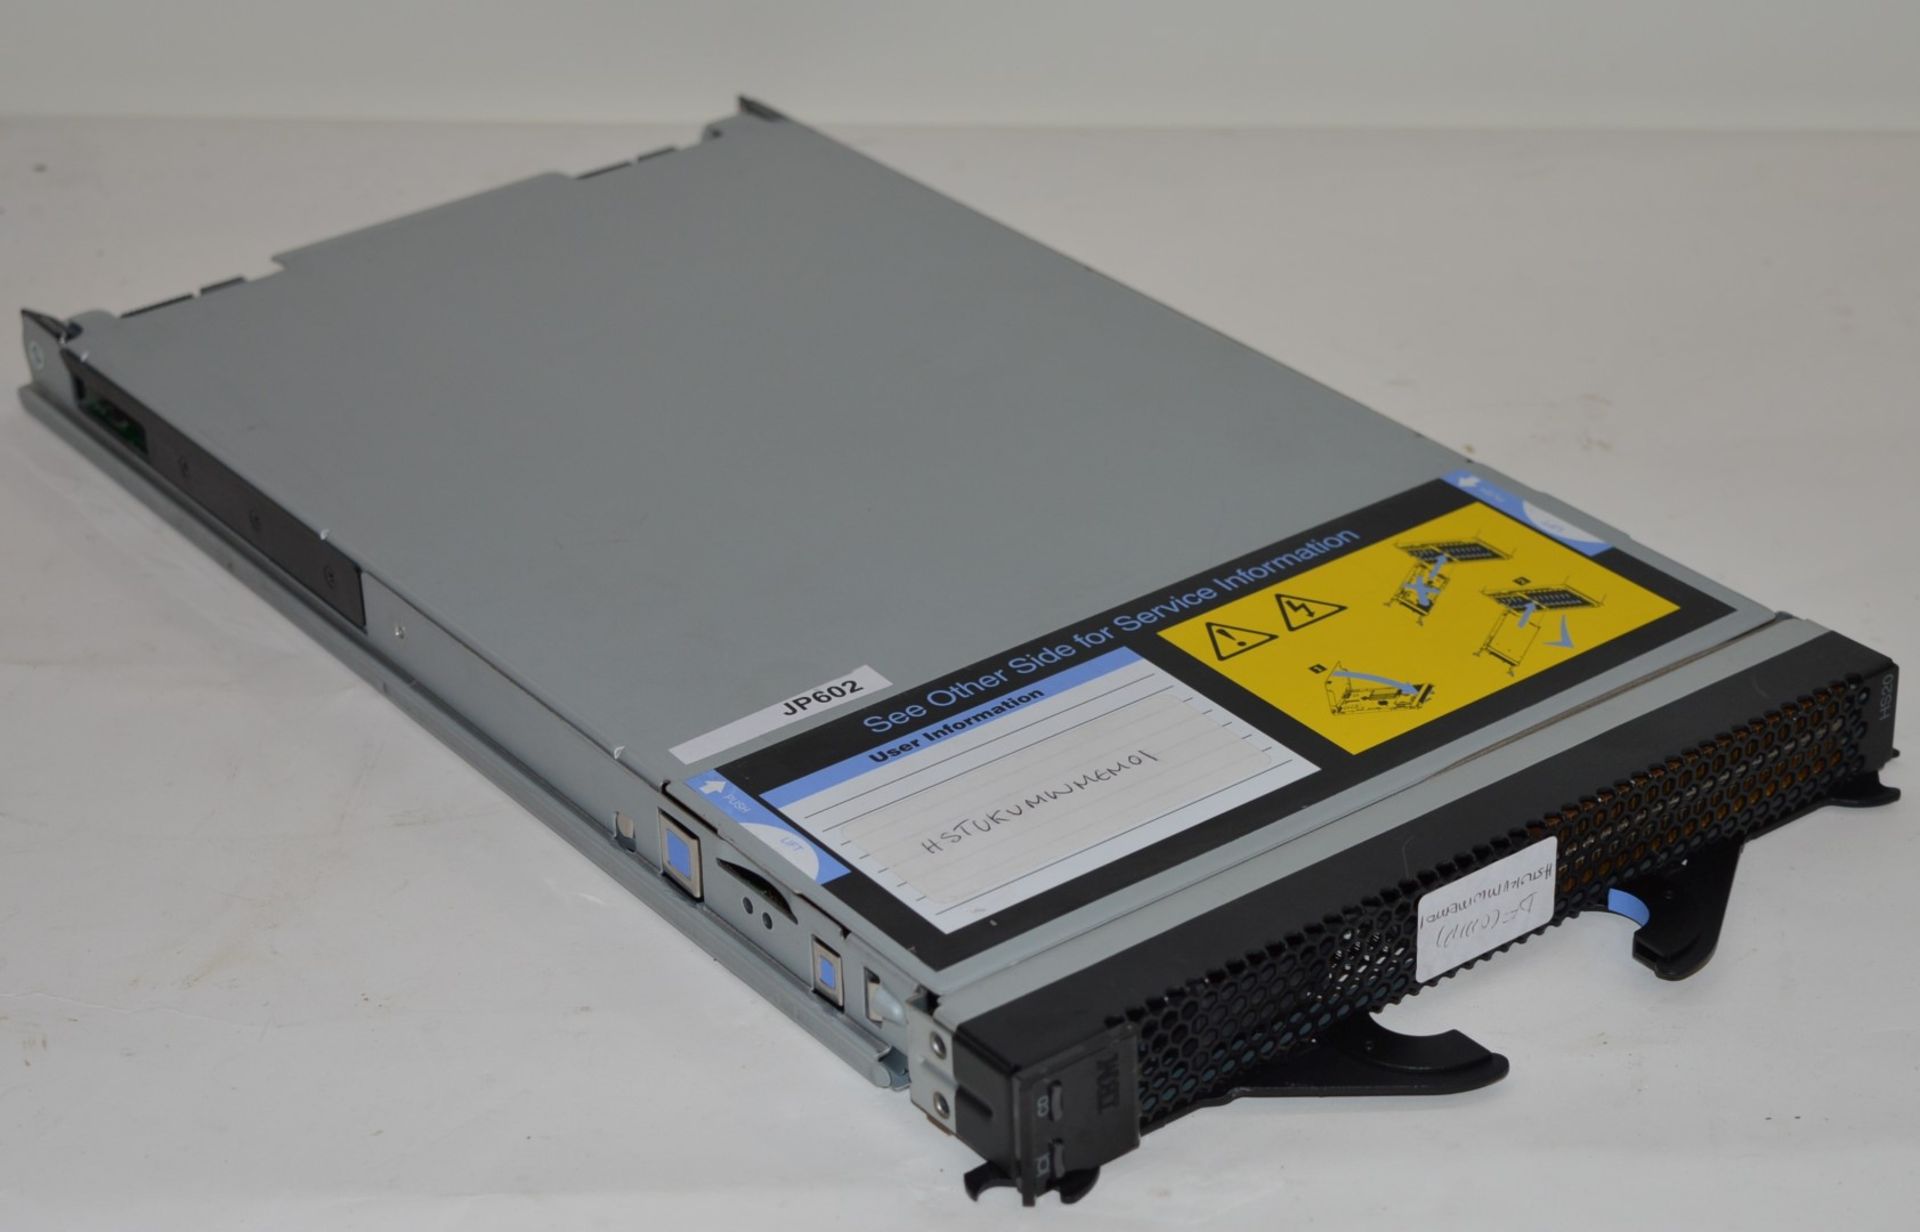 1 x IBM HS20 Blade Server - Model 35G - Includes 1 x Xeon Processors and 3gb Ram - CL400 - Ref JP607